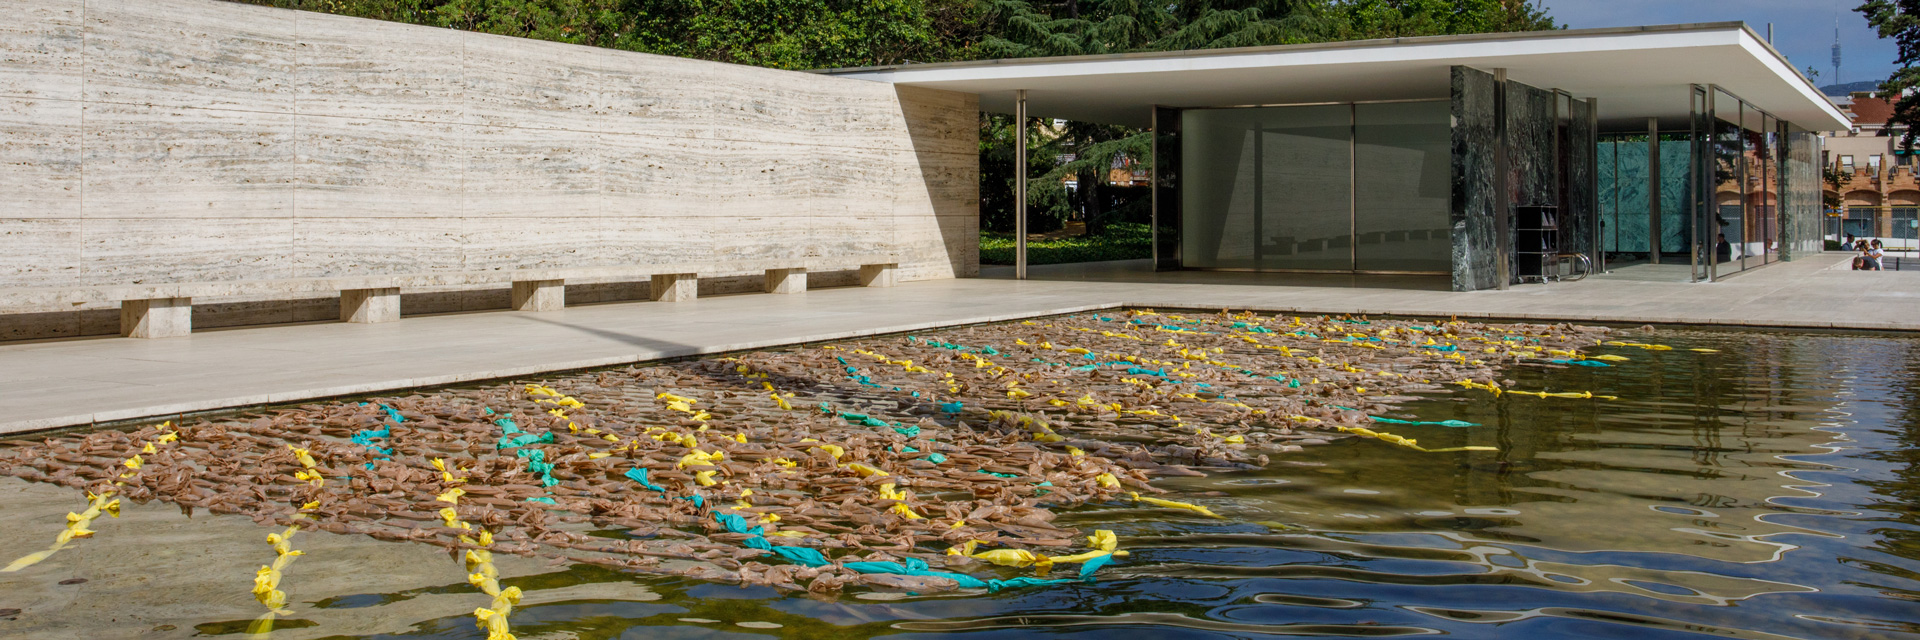 View of reflecting pool at Mies van der Rohe pavilion. A net made of strands of plastic shopping bags covers most of the pool.